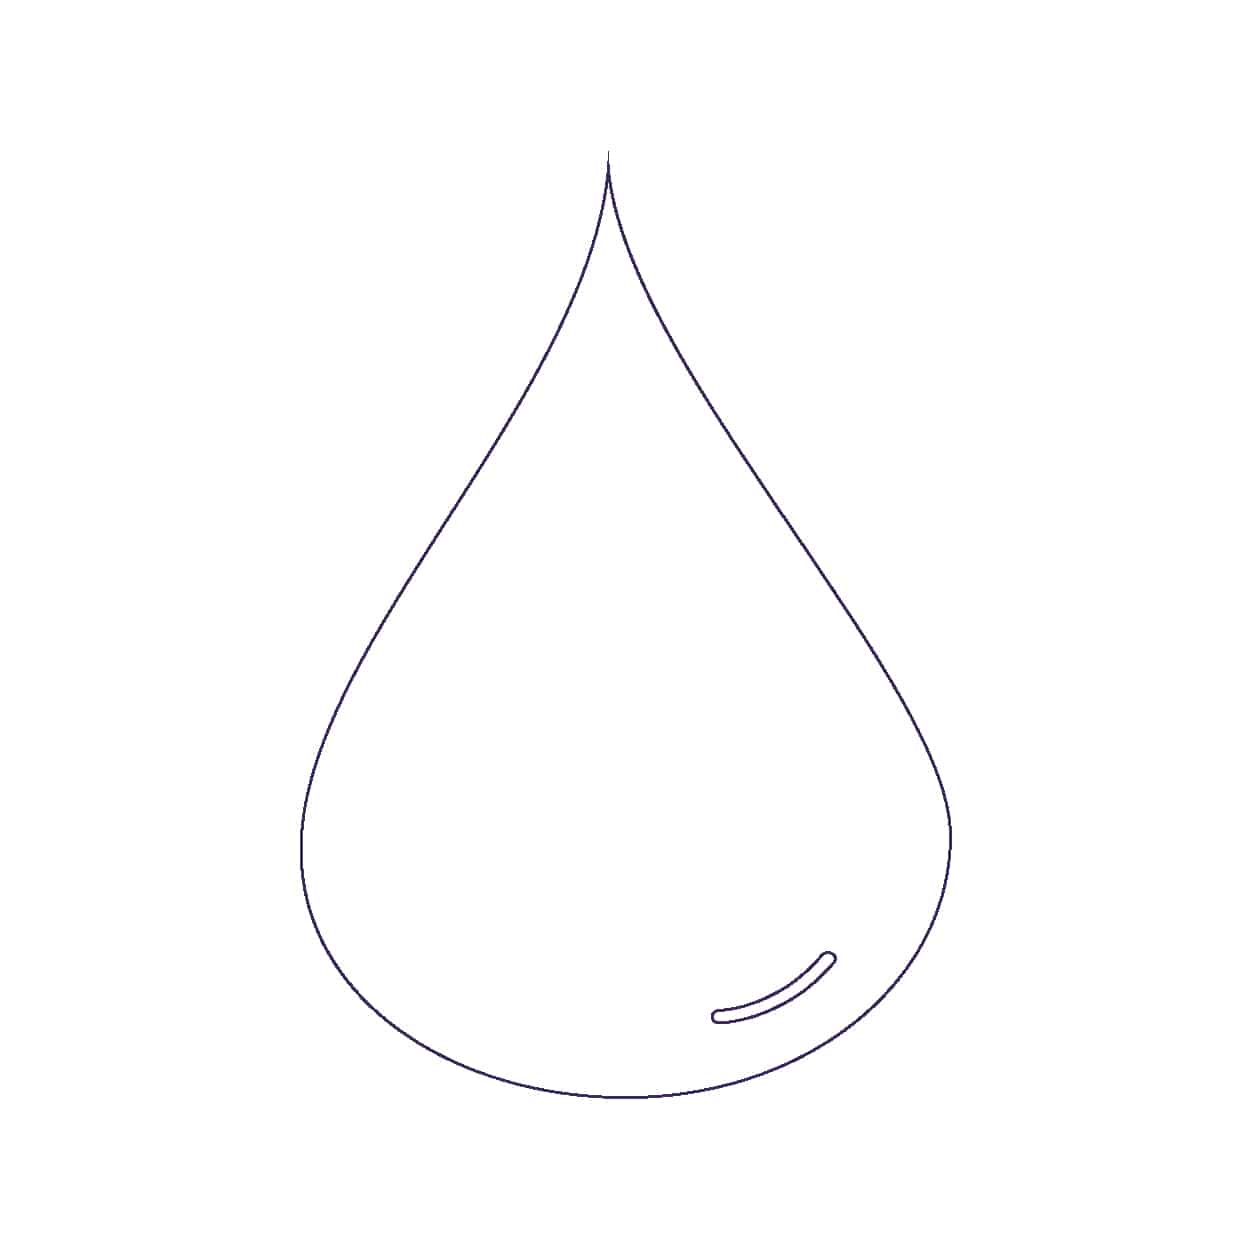 Purple outline of an oil droplet on a white background